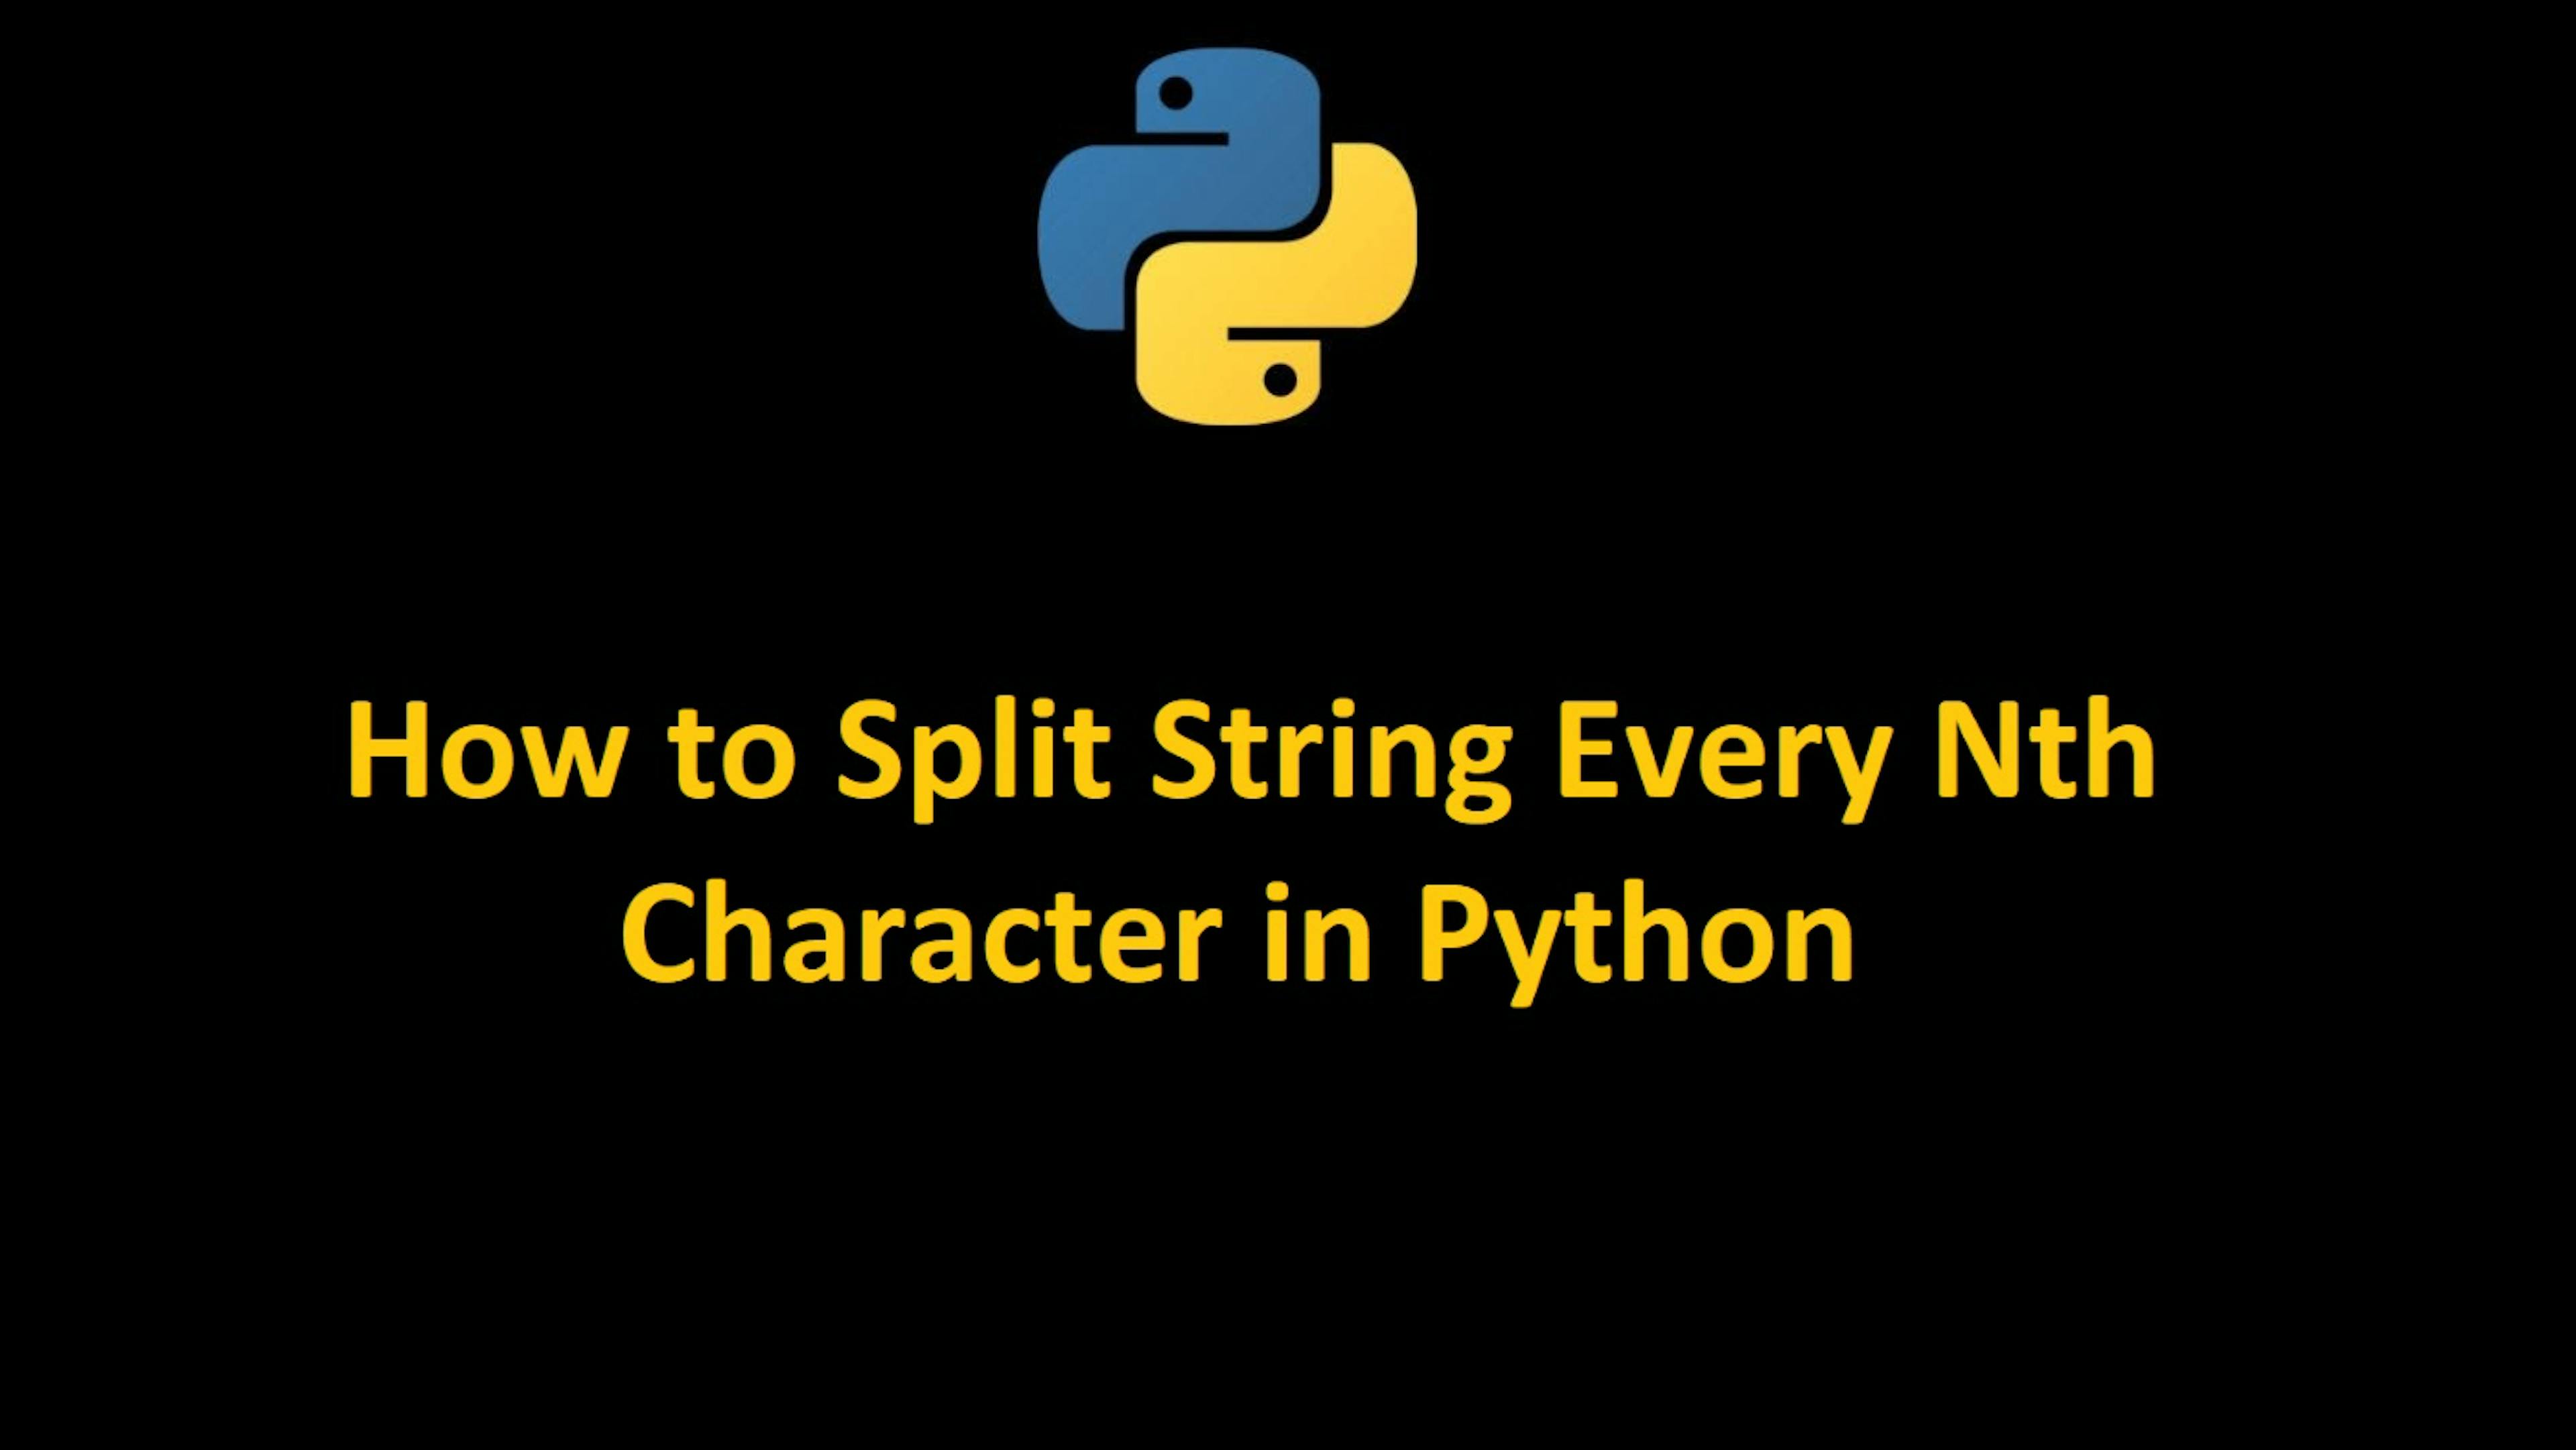 featured image - How to Split String Every Nth Character in Python